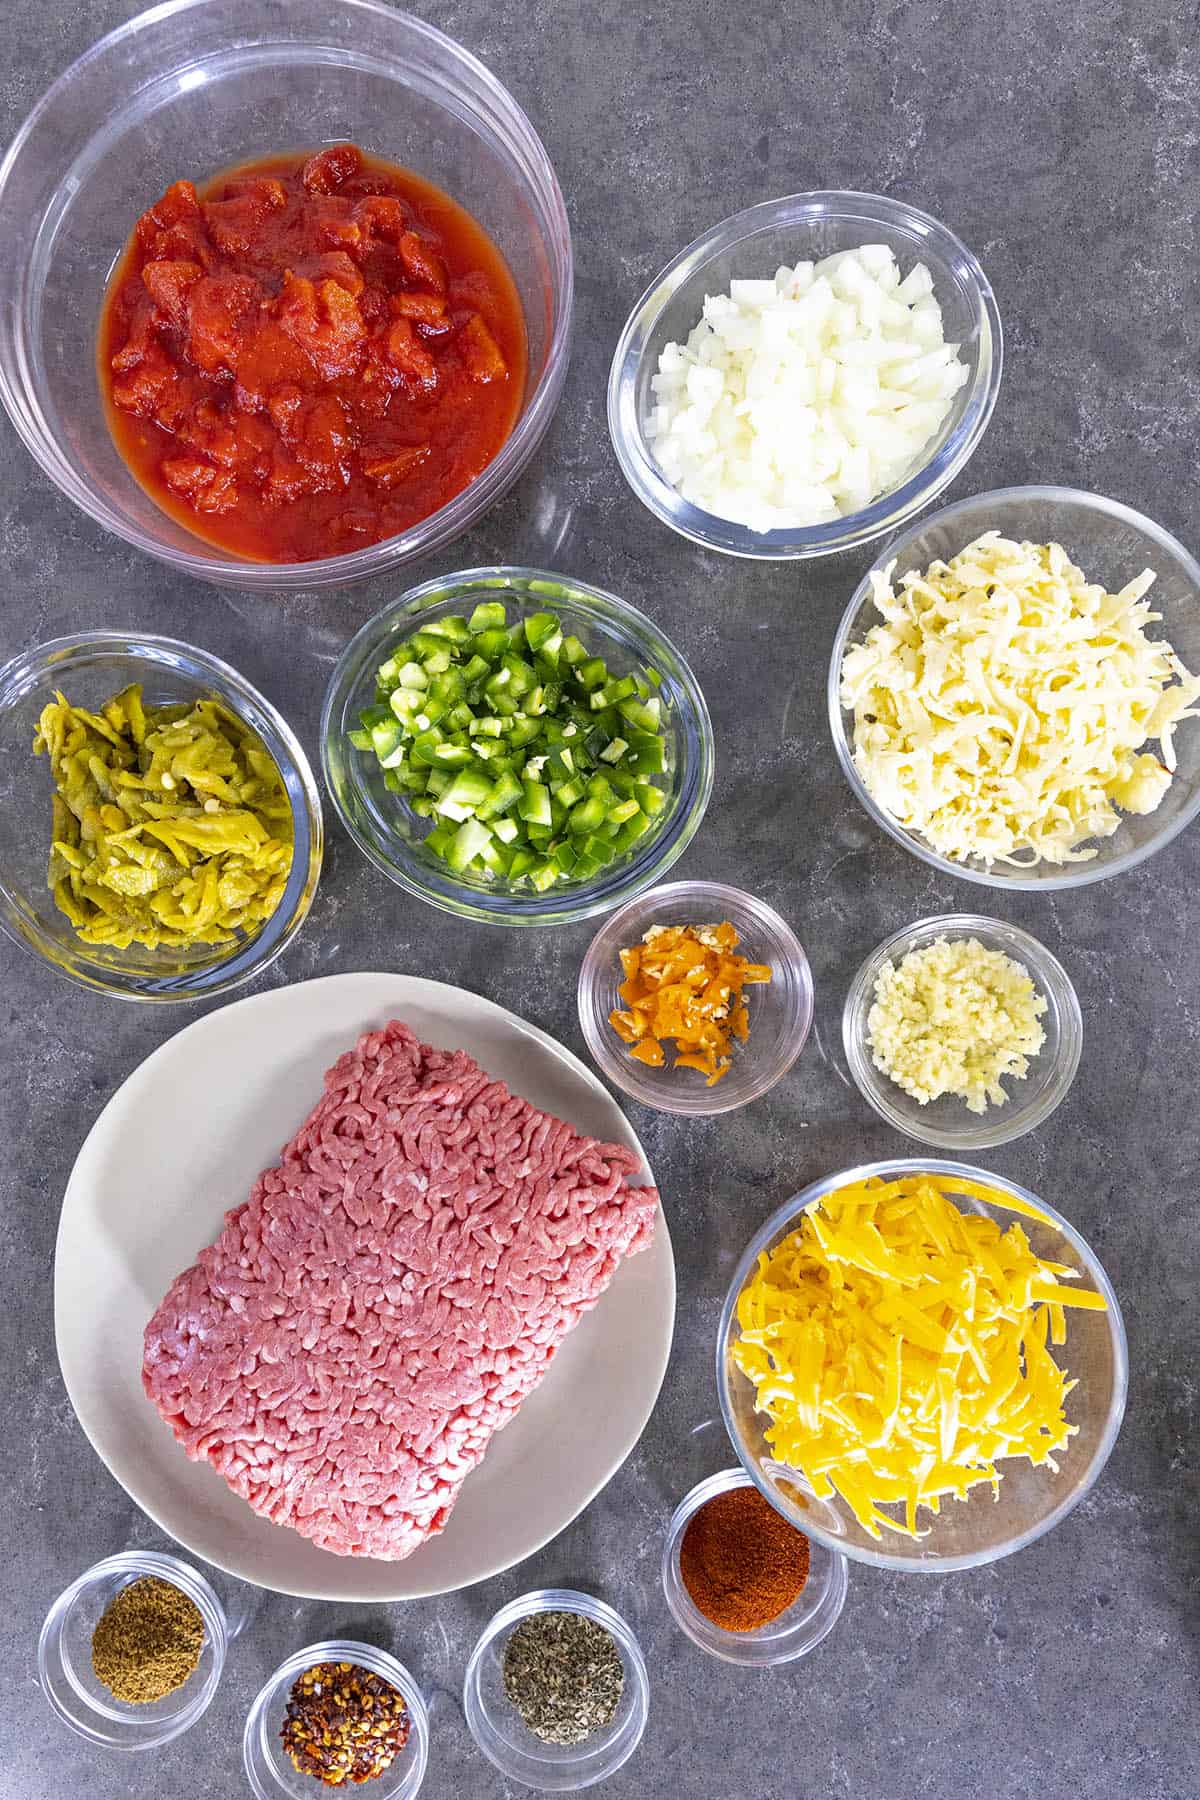 Hatch Chili Cheese Dip Ingredients